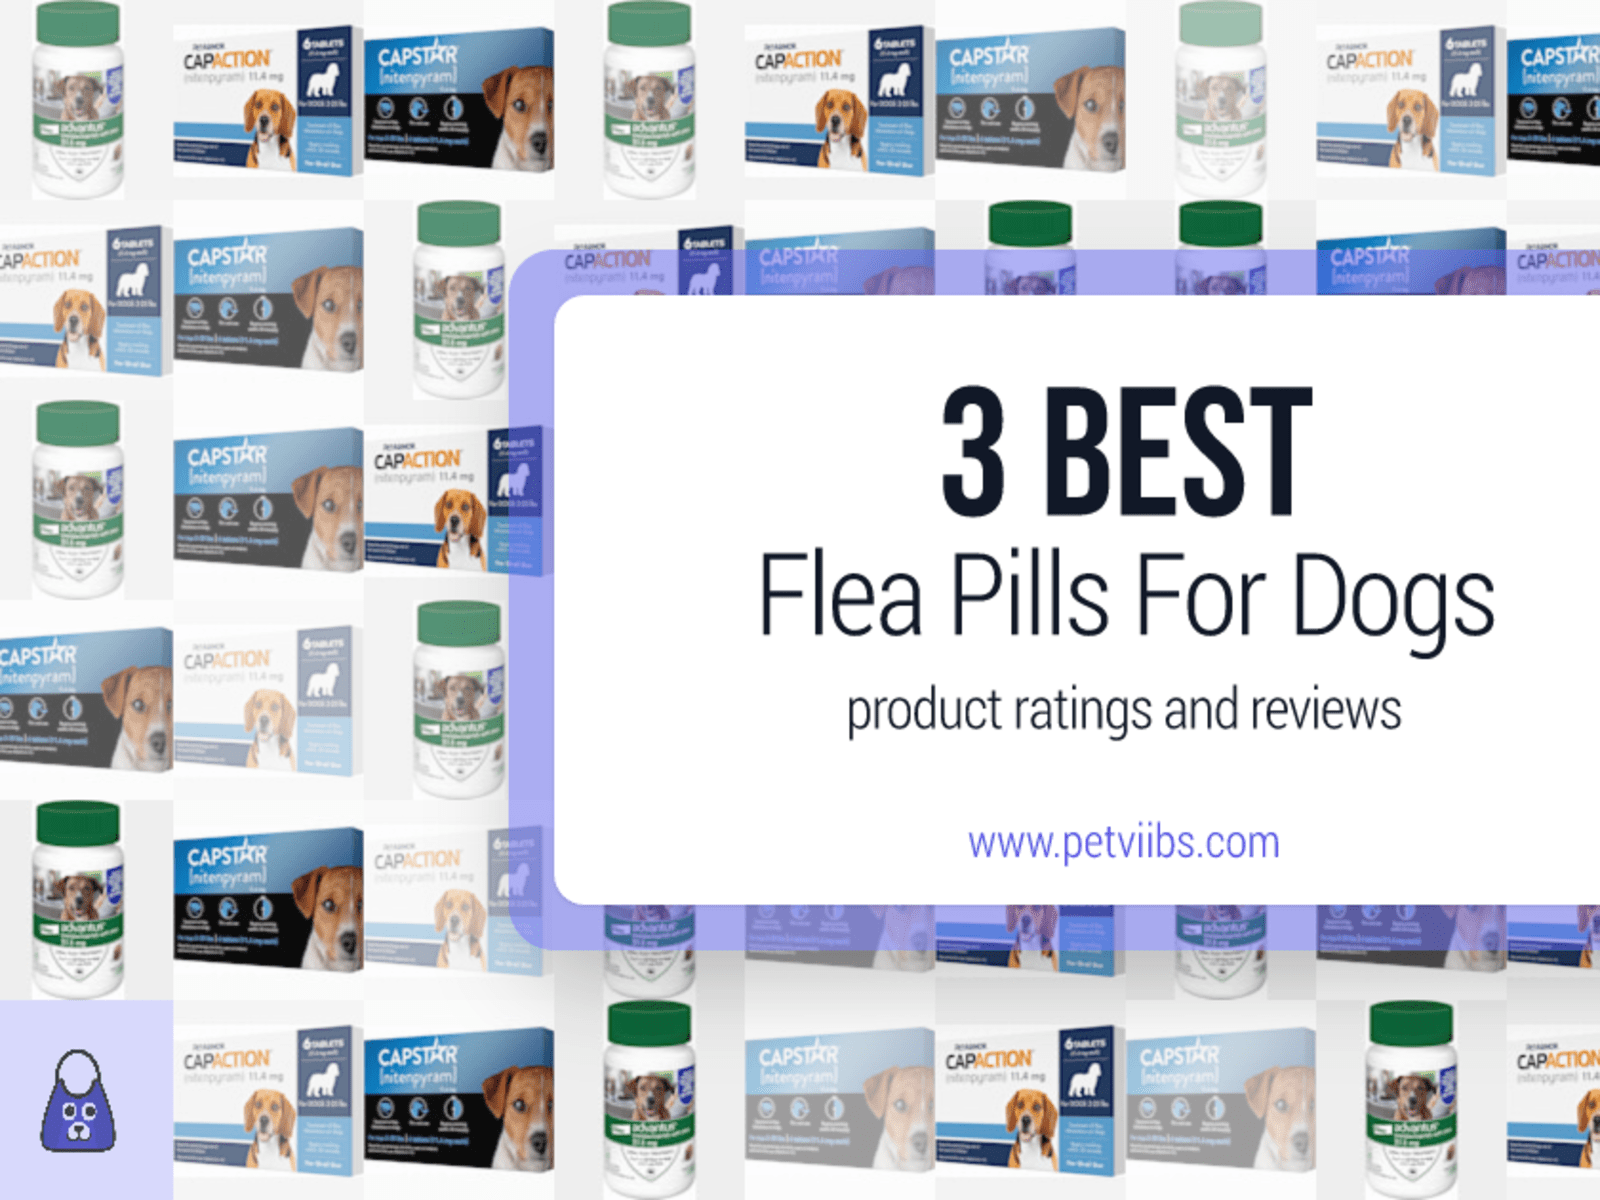 Best Flea Pills For Dogs Ratings and Reviews